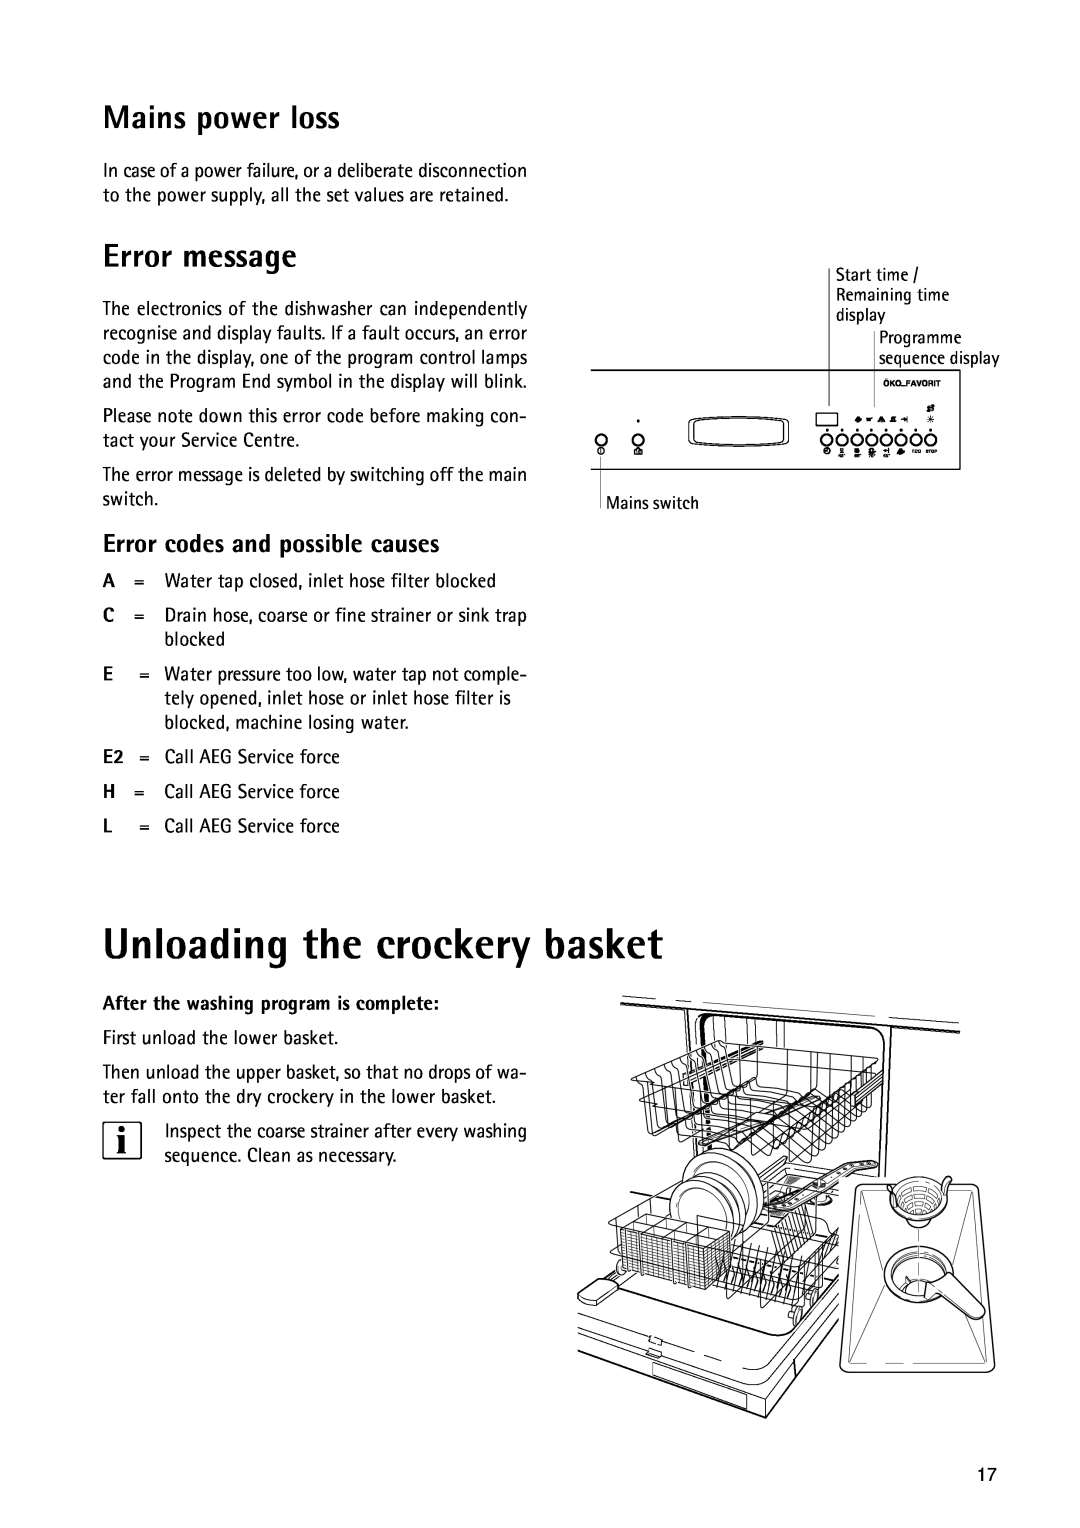 Electrolux 55750 manual Unloading the crockery basket, Mains power loss, Error message, Error codes and possible causes 